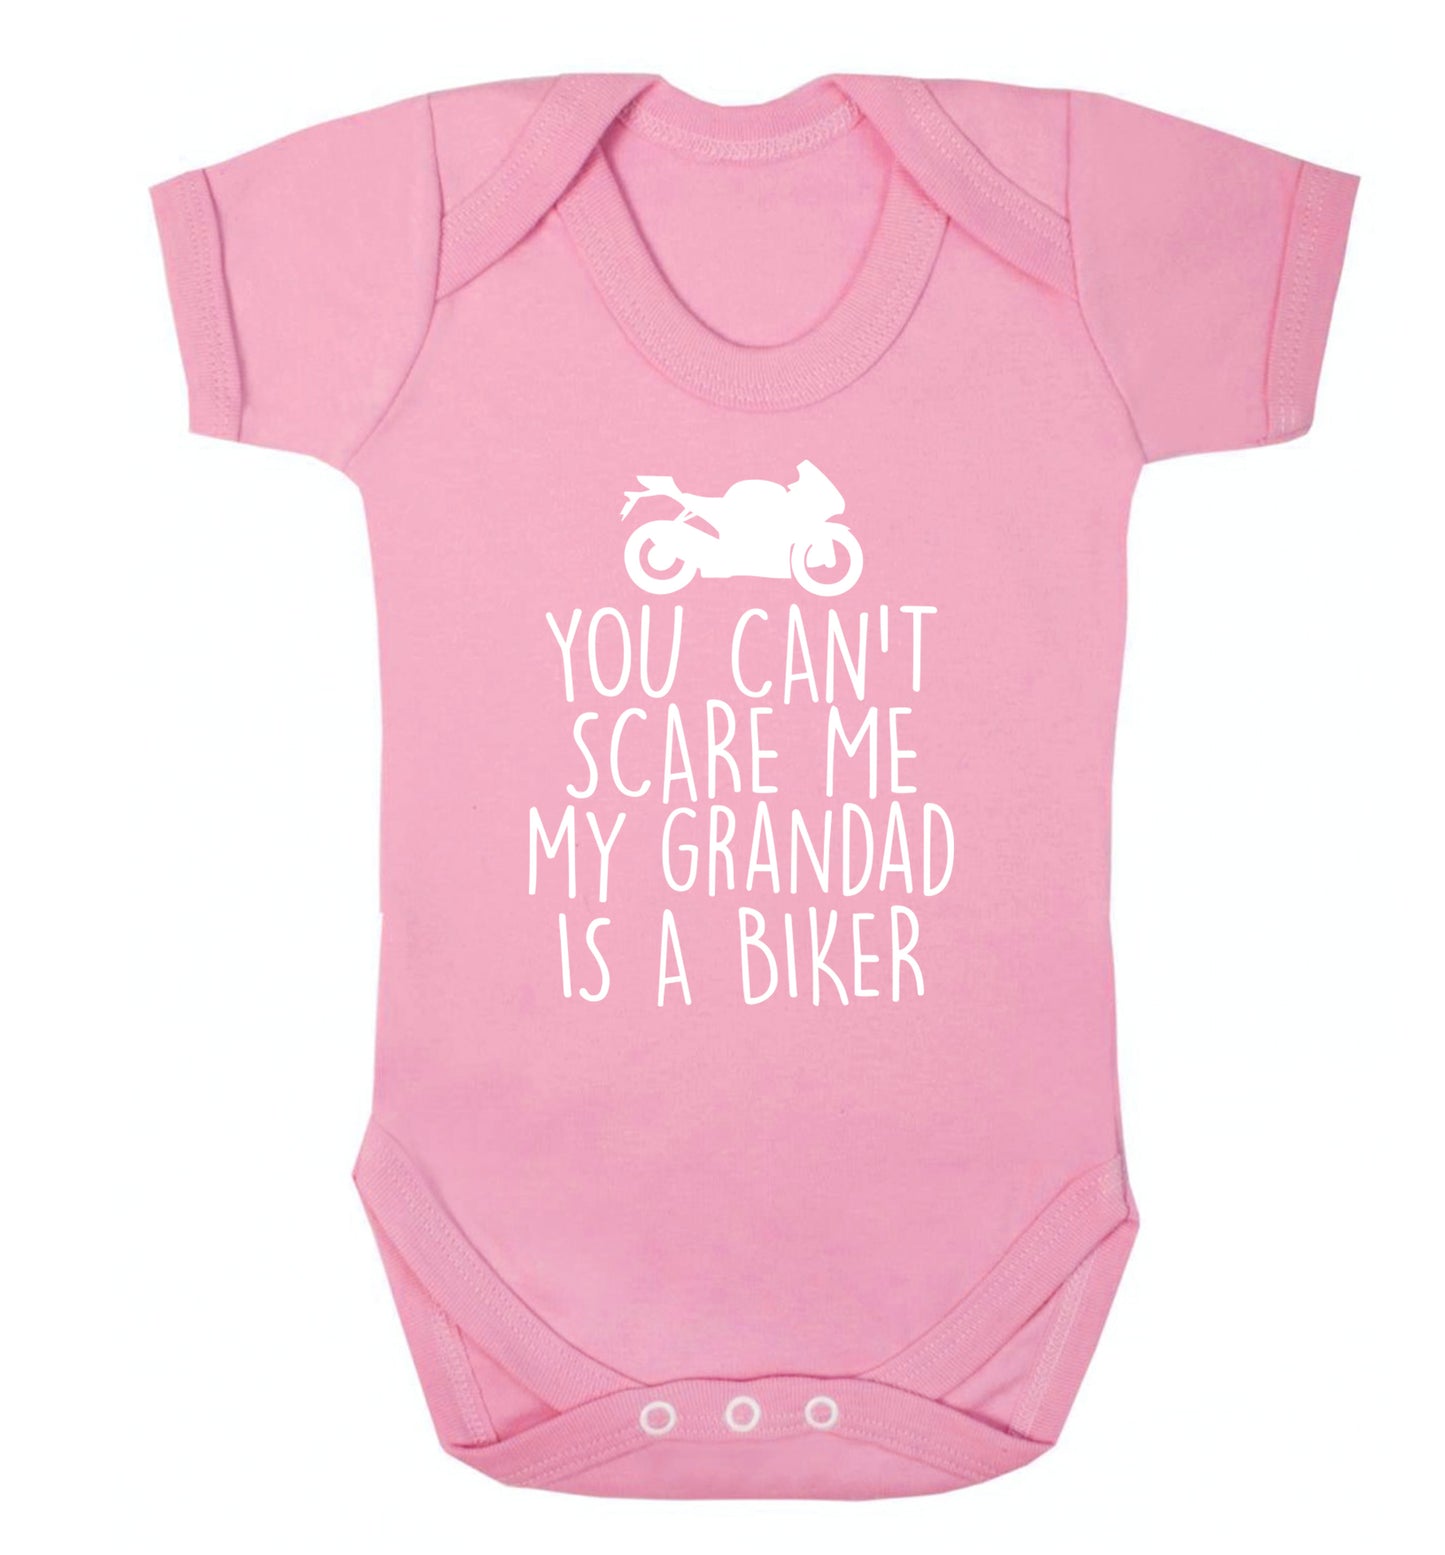 You can't scare me my grandad is a biker Baby Vest pale pink 18-24 months